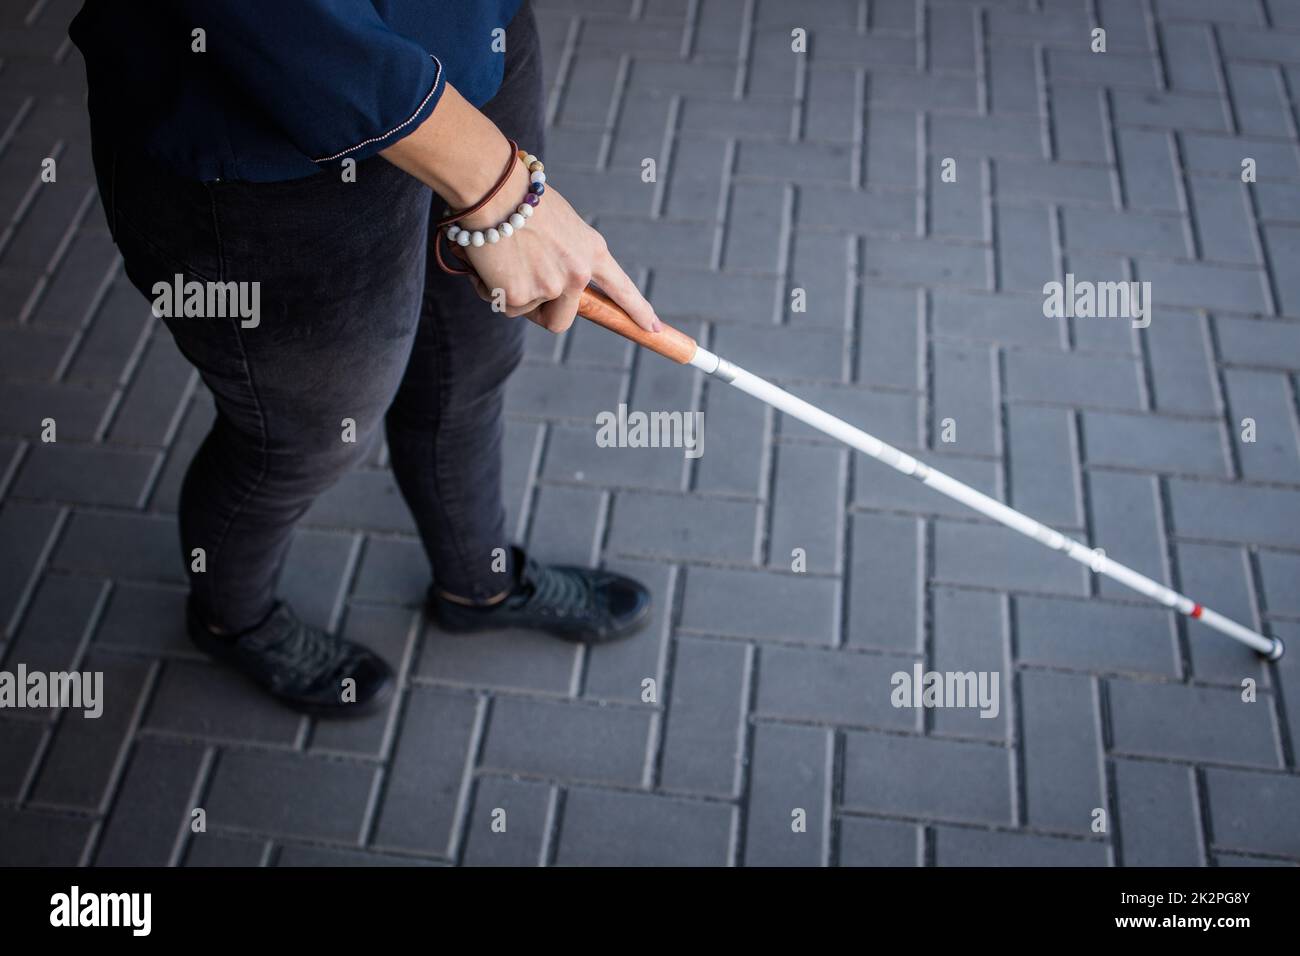 Blind woman walking on city streets, using her white cane to navigate the urban space better and to get to her destination safely Stock Photo